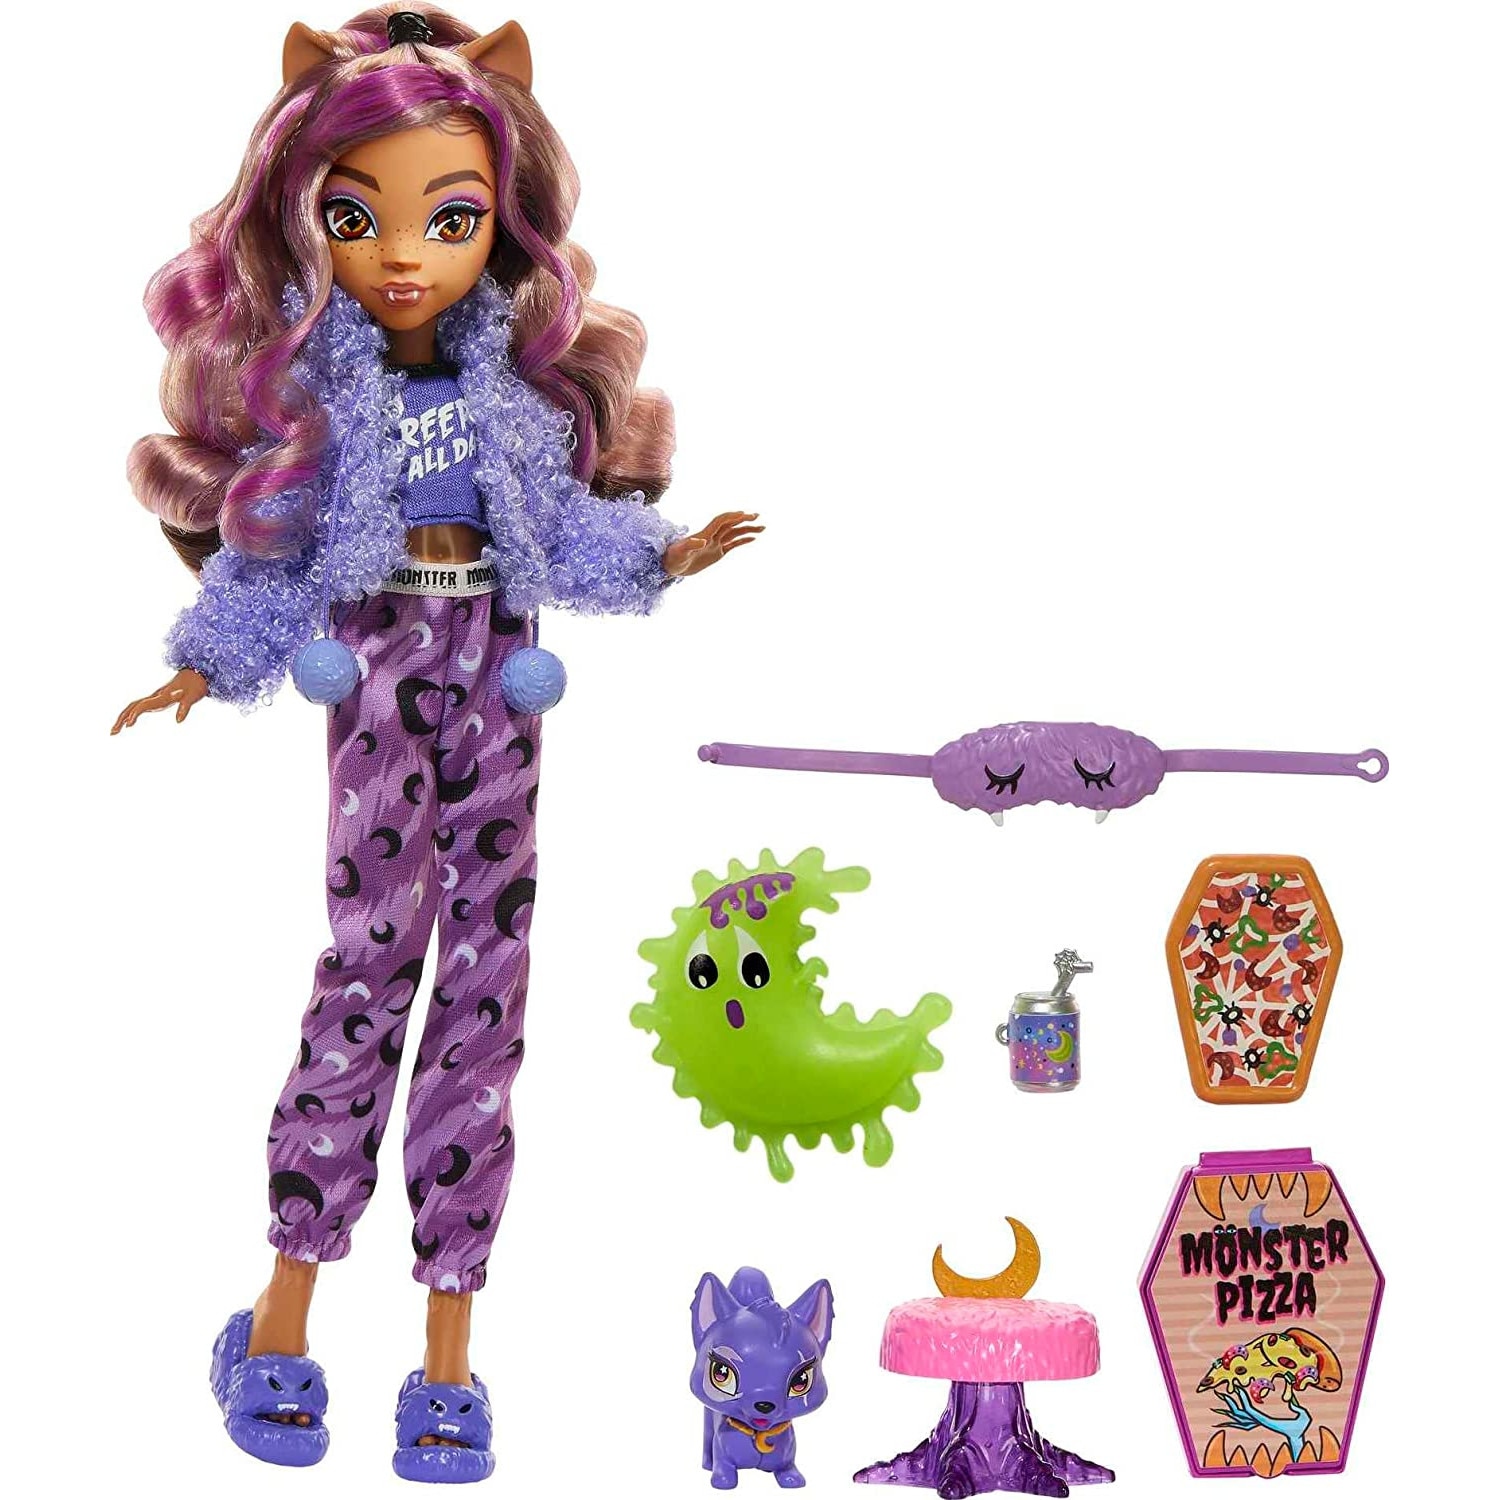 Sleet nautical mile Opera Papusa Mattel, Monster High, Clawdeen Wolf Creepover Party cu accesorii si  animalut, articulatii mobile, 30 cm - eMAG.ro